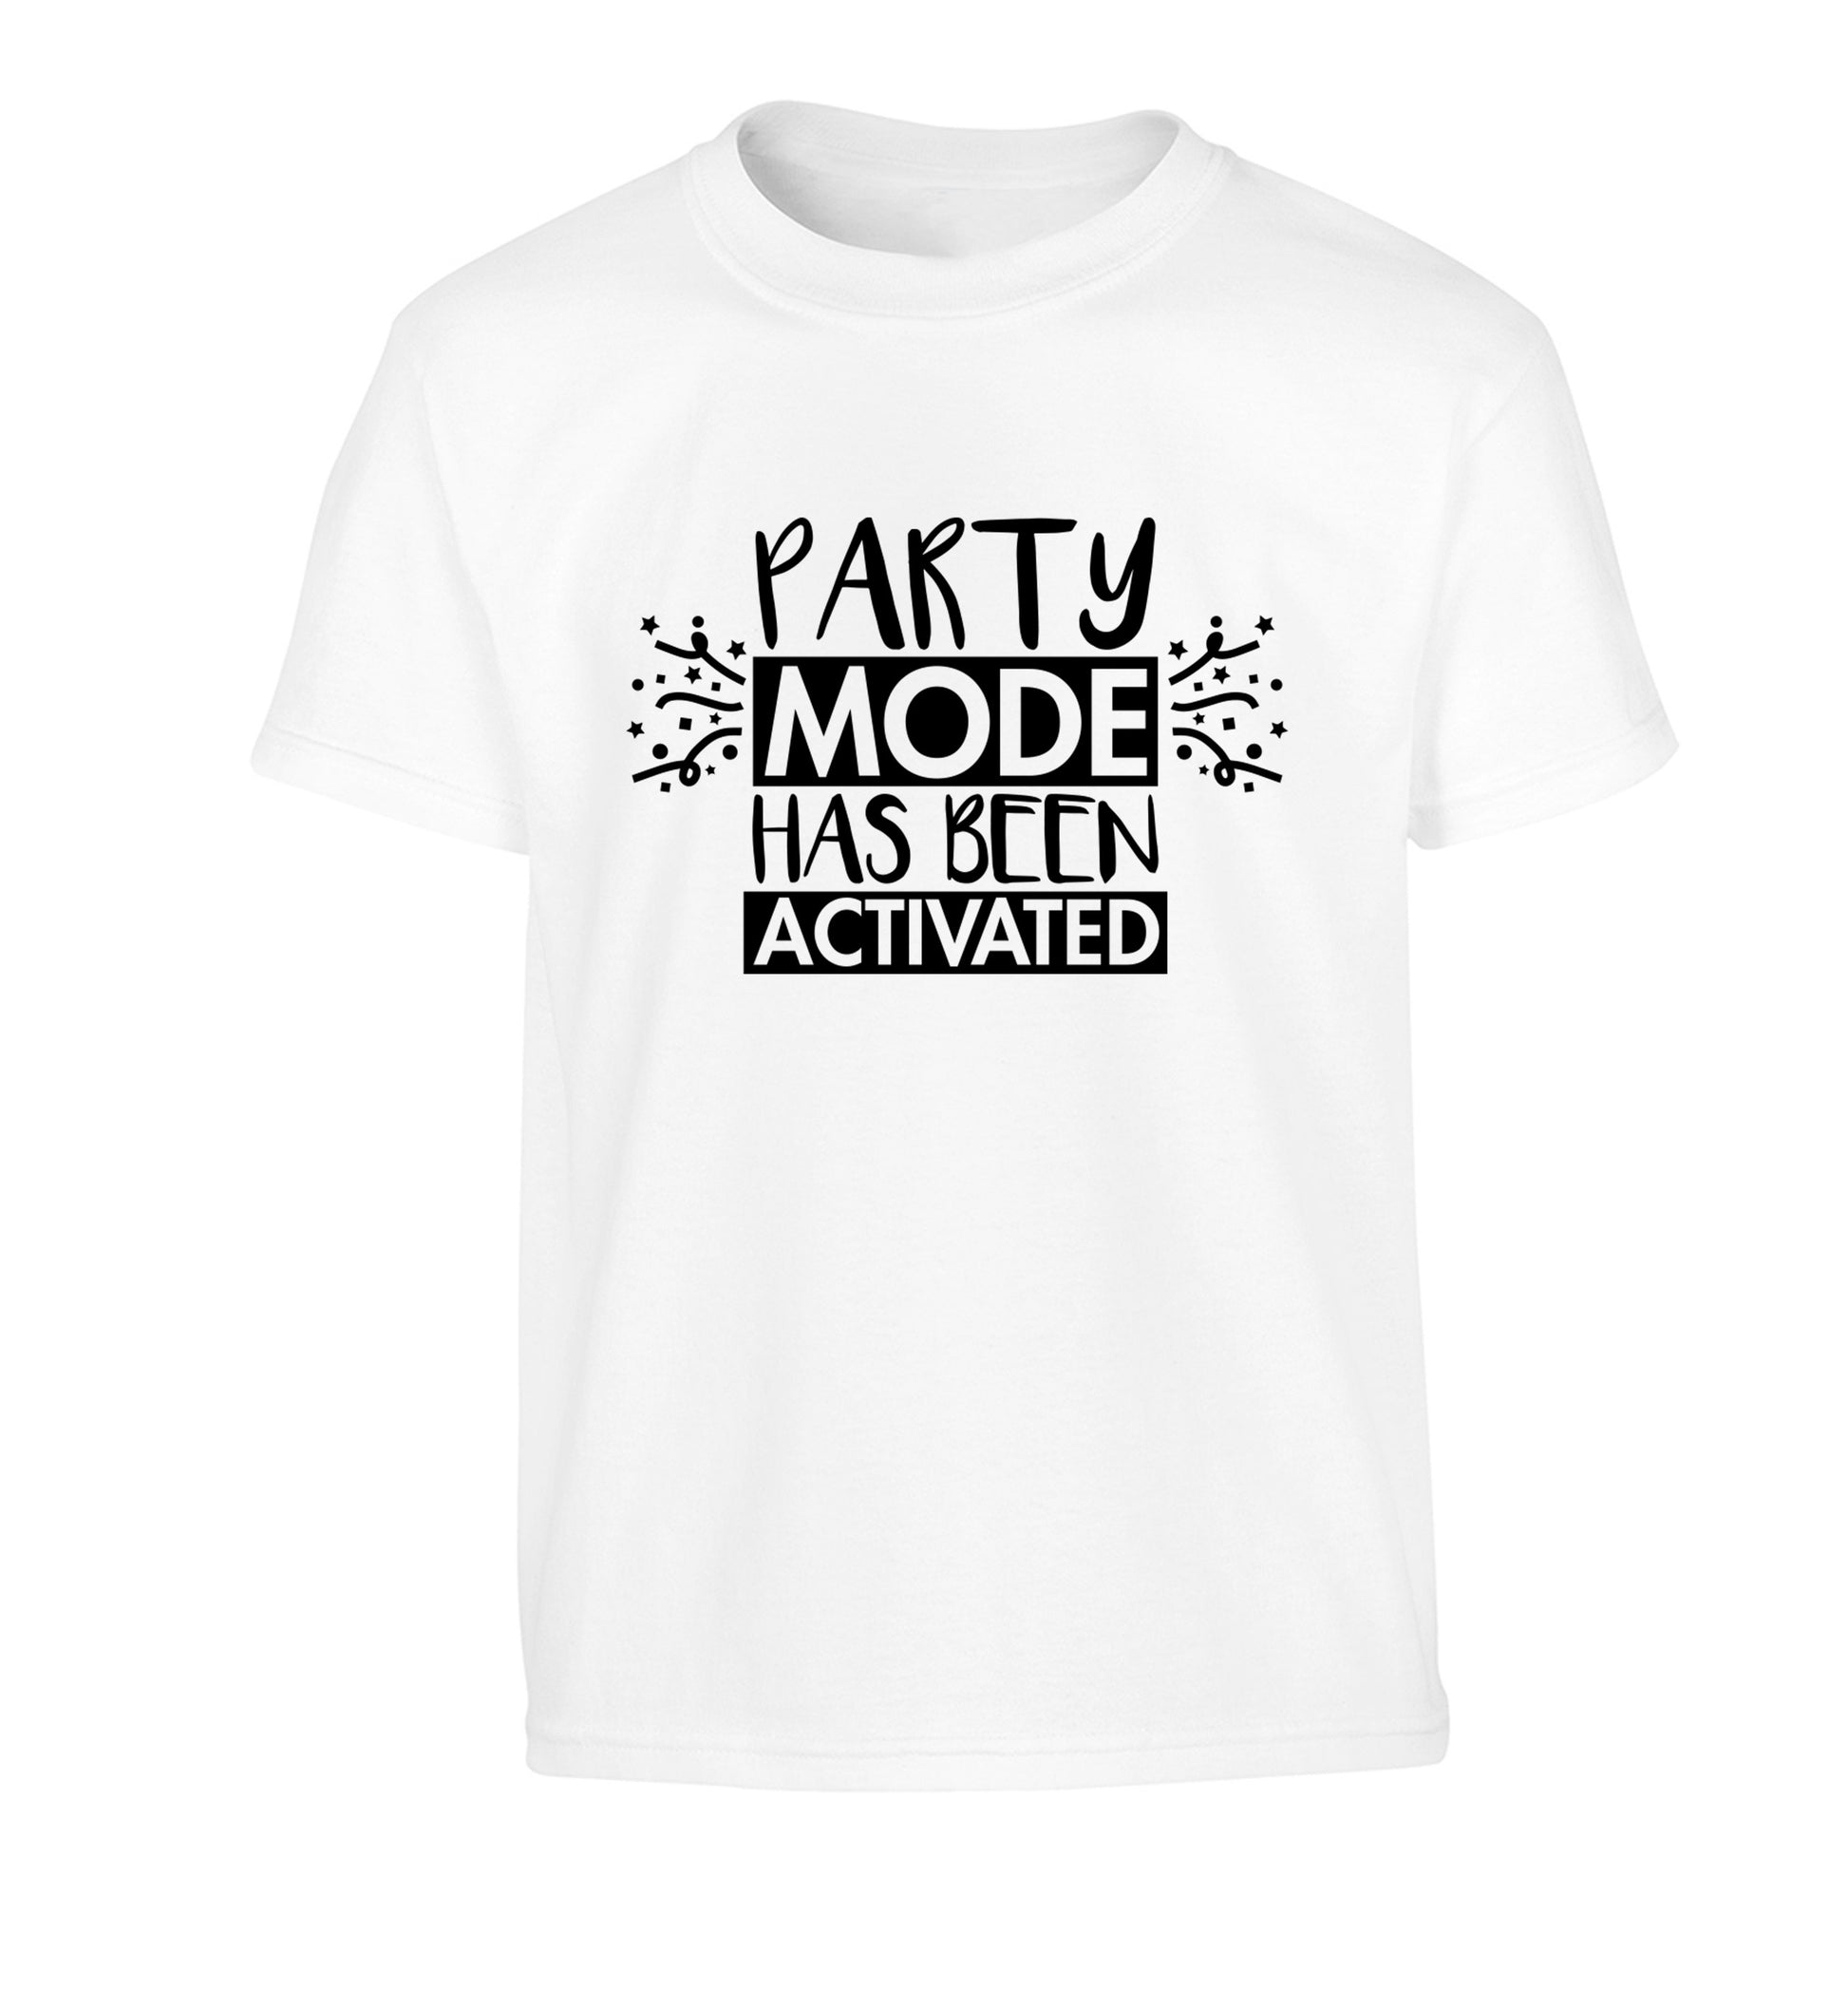 Please do not disturb party mode has been activated Children's white Tshirt 12-14 Years